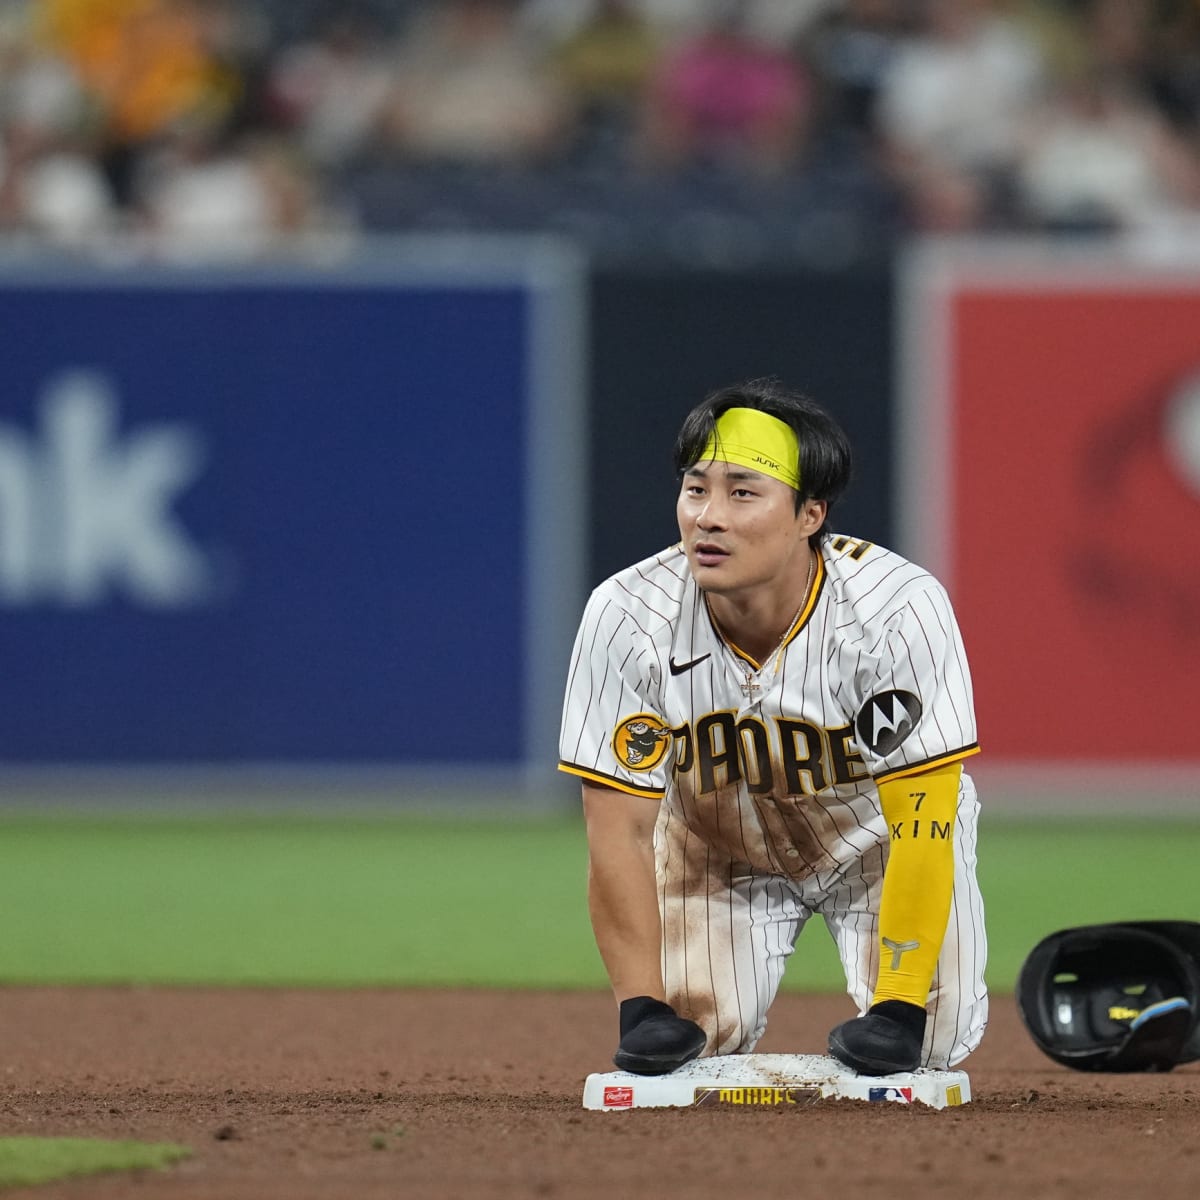 Padres Trade Deadline Deal With Pirates Turned Into Absolute Disaster -  Sports Illustrated Inside The Padres News, Analysis and More